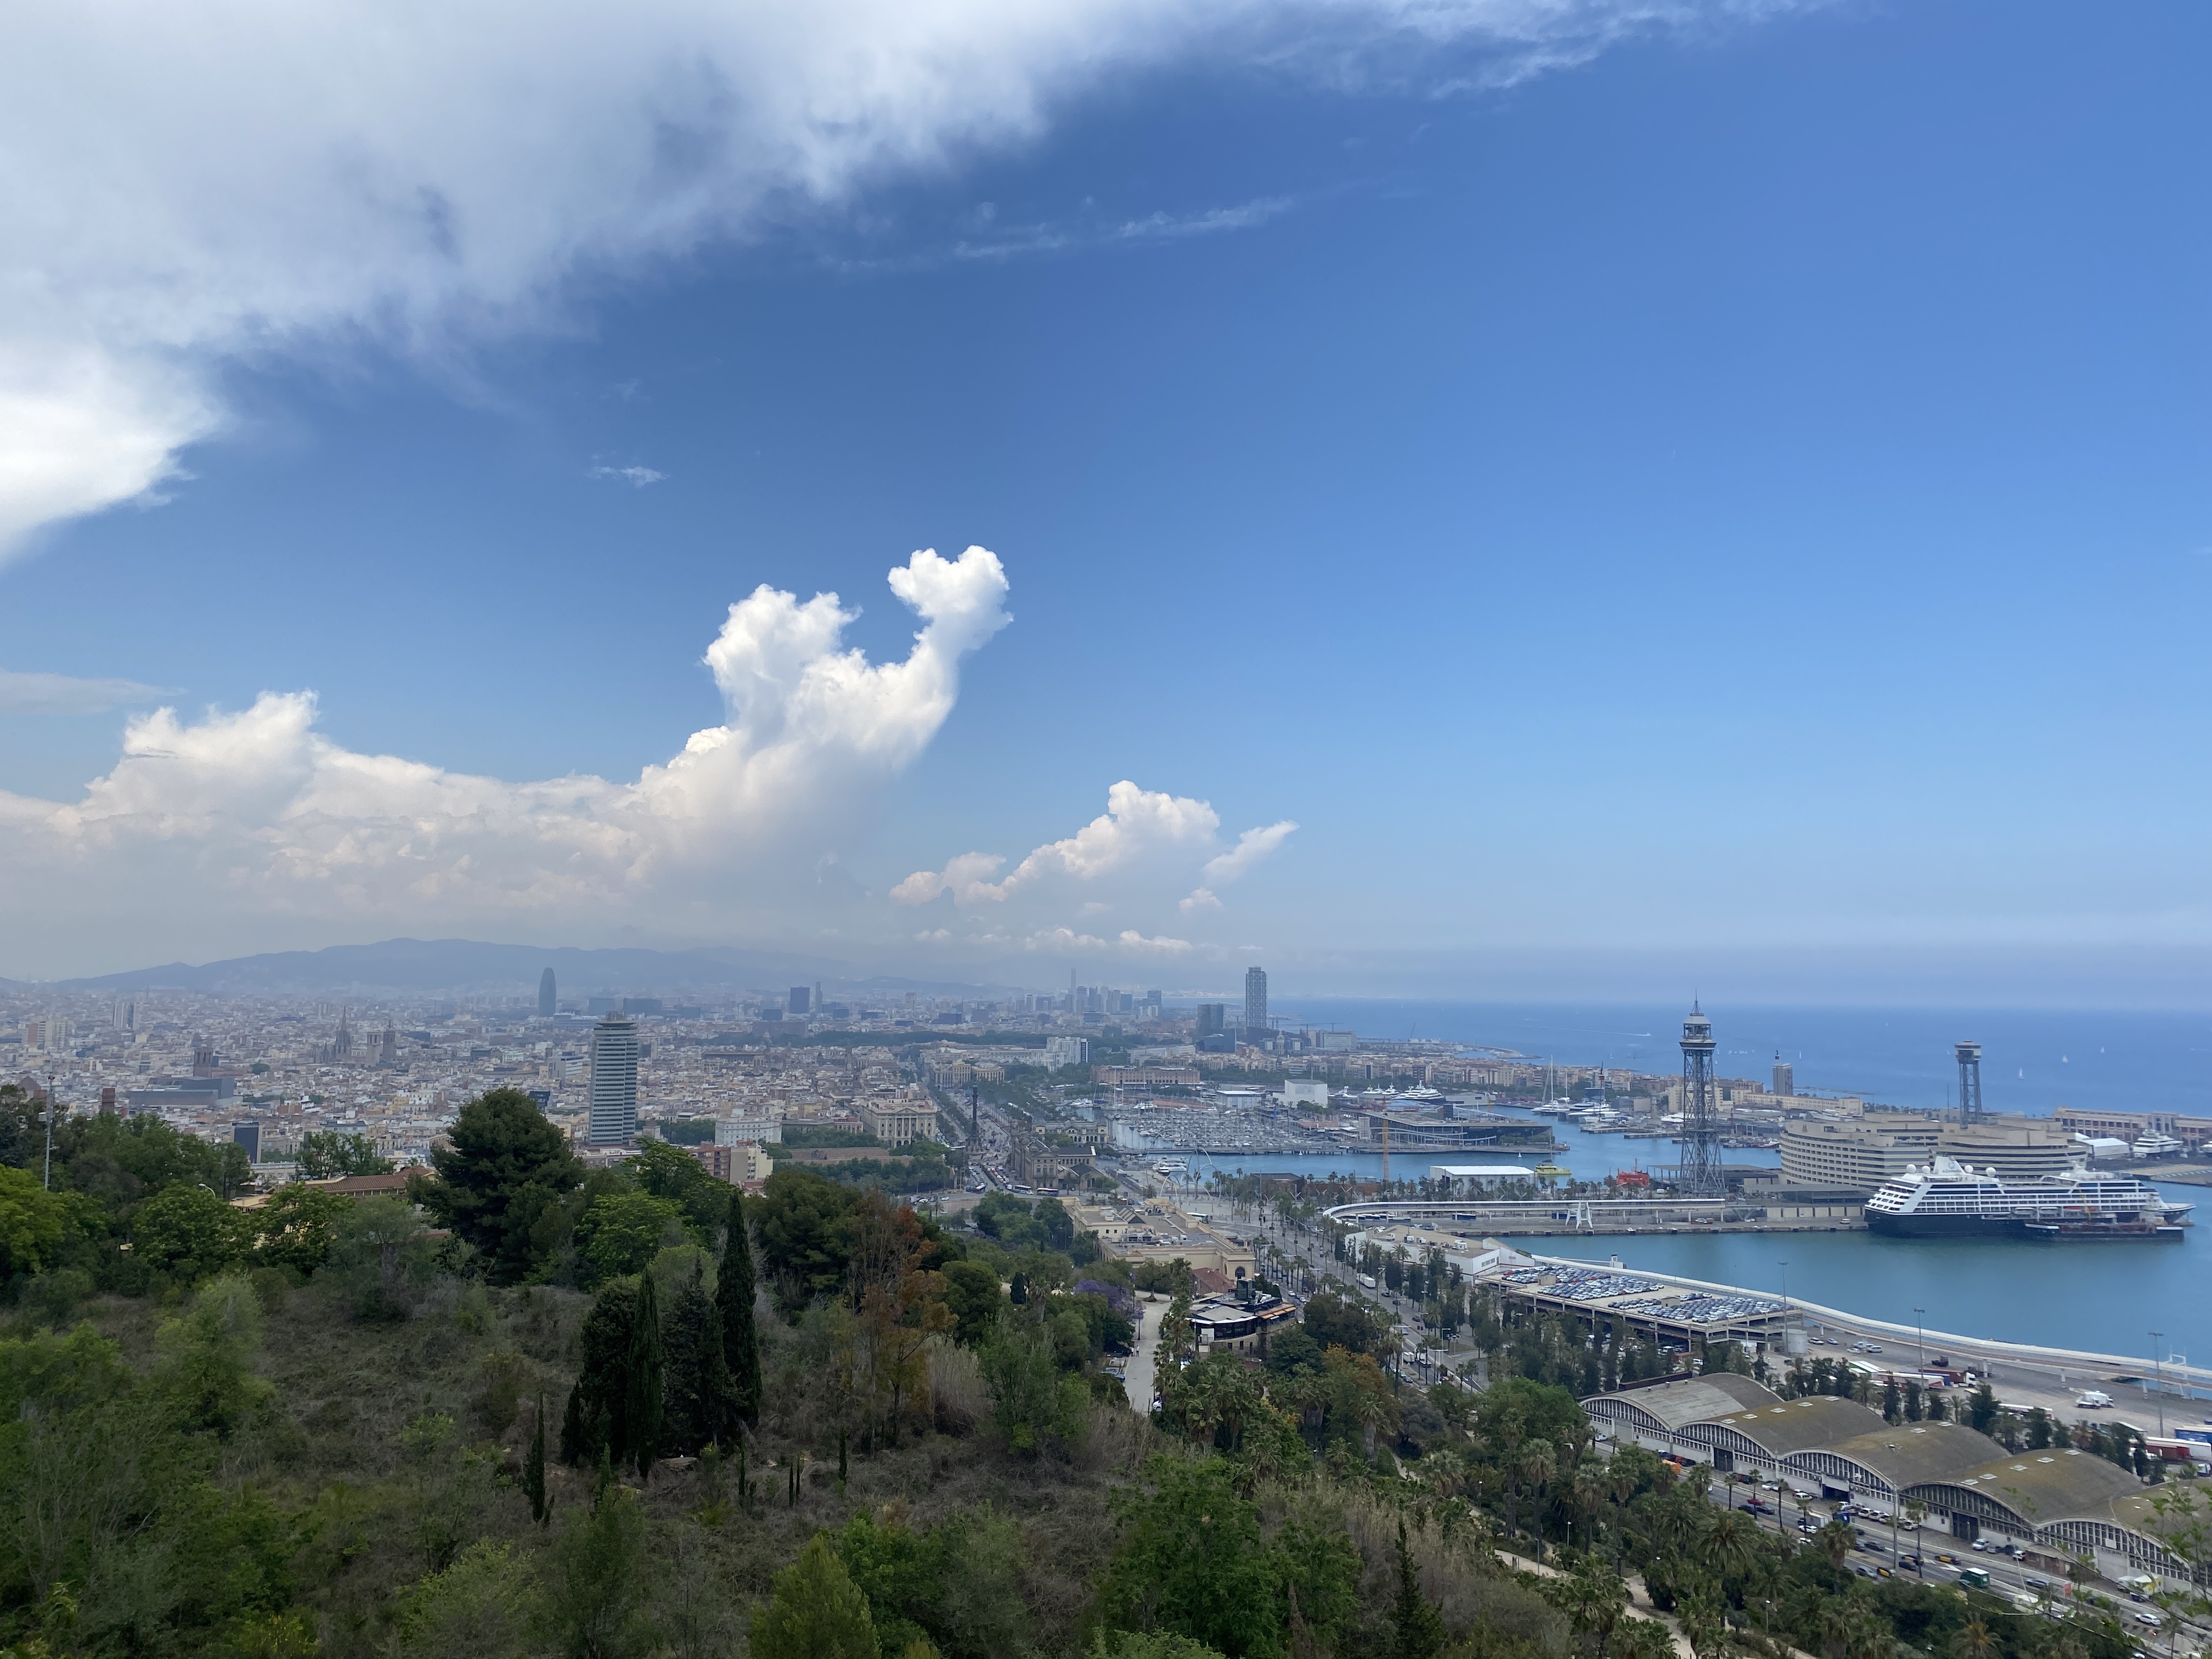 A cityscape view of Barcelona and the Sea